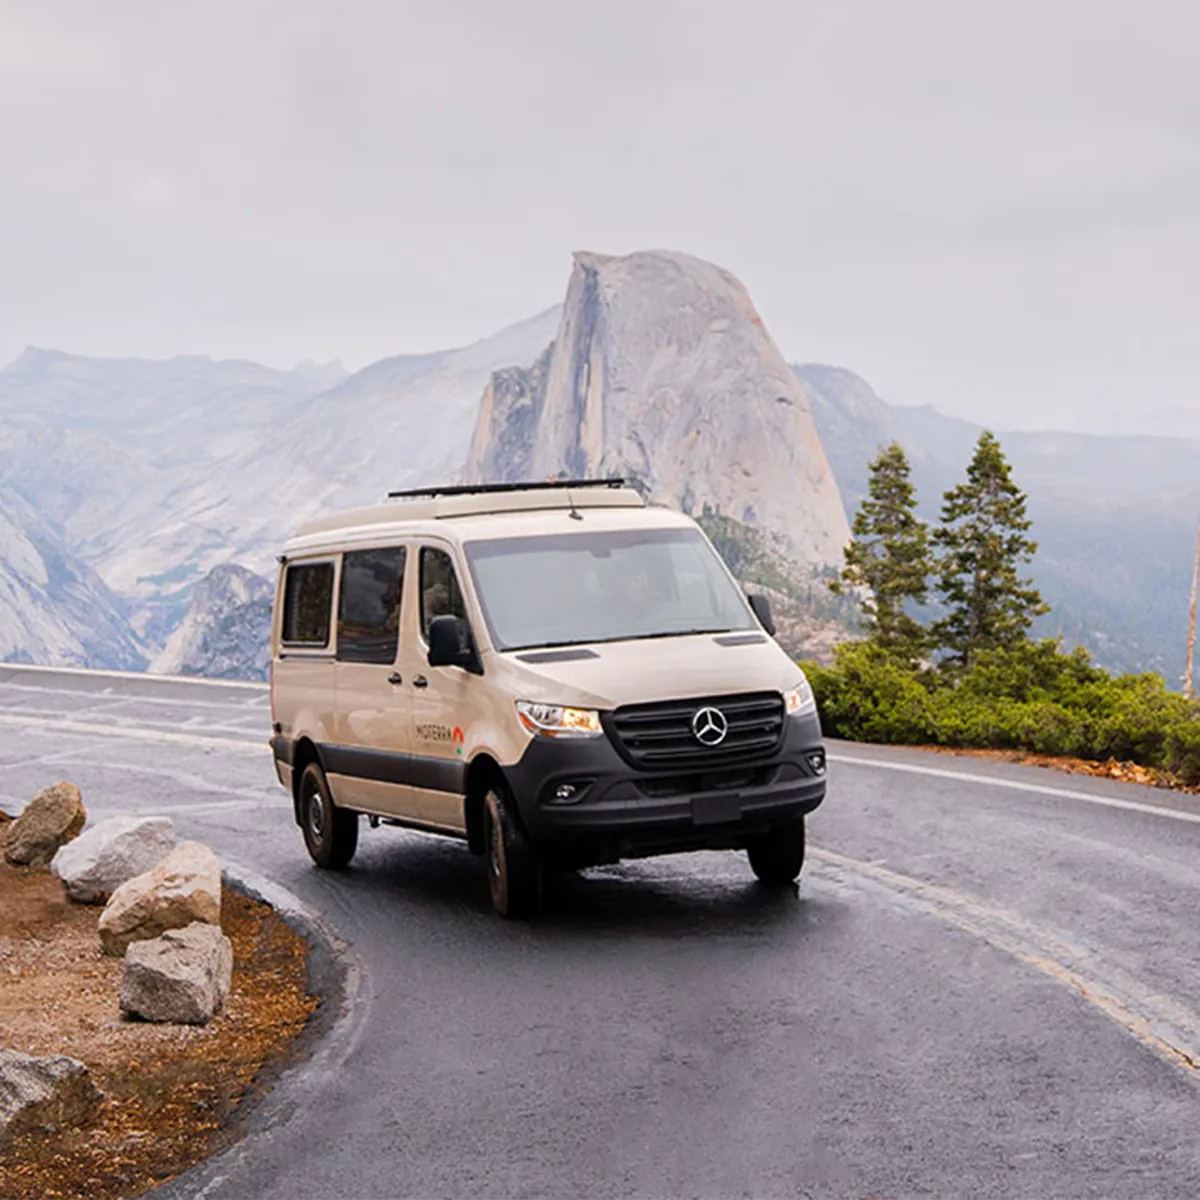 Moterra Yosemite Campervan Rental on Road with Half Dome in Background